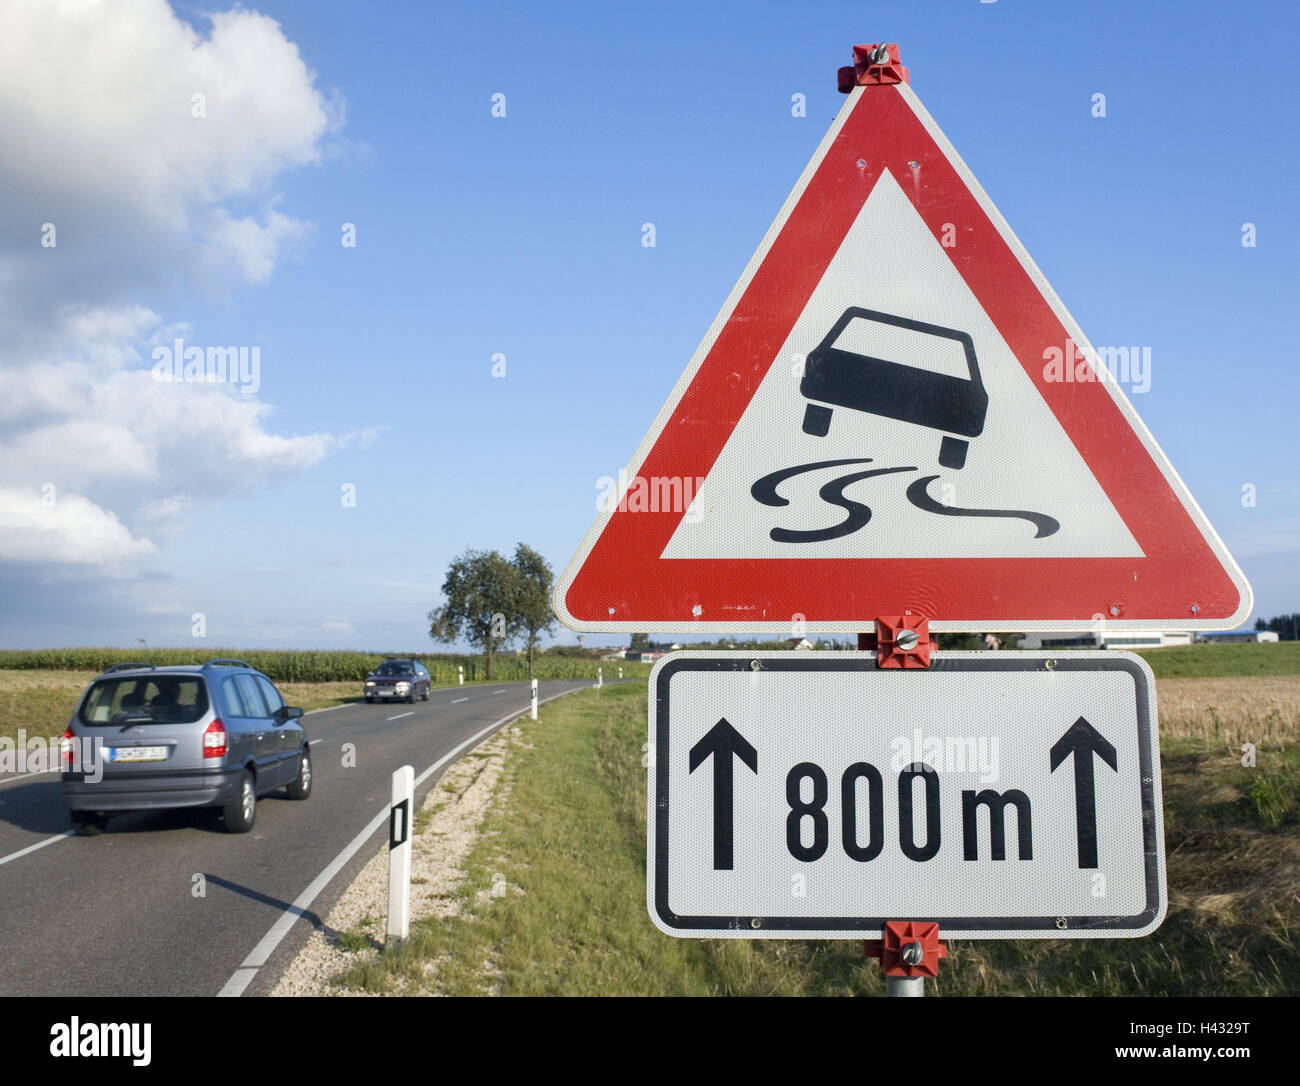 Country road, road sign, warning, slick road, warning tip, street, traffic, cars, passenger car, traffic, danger collision, traffic sign, sign, danger sign, red, attention, outside, deserted, Stock Photo